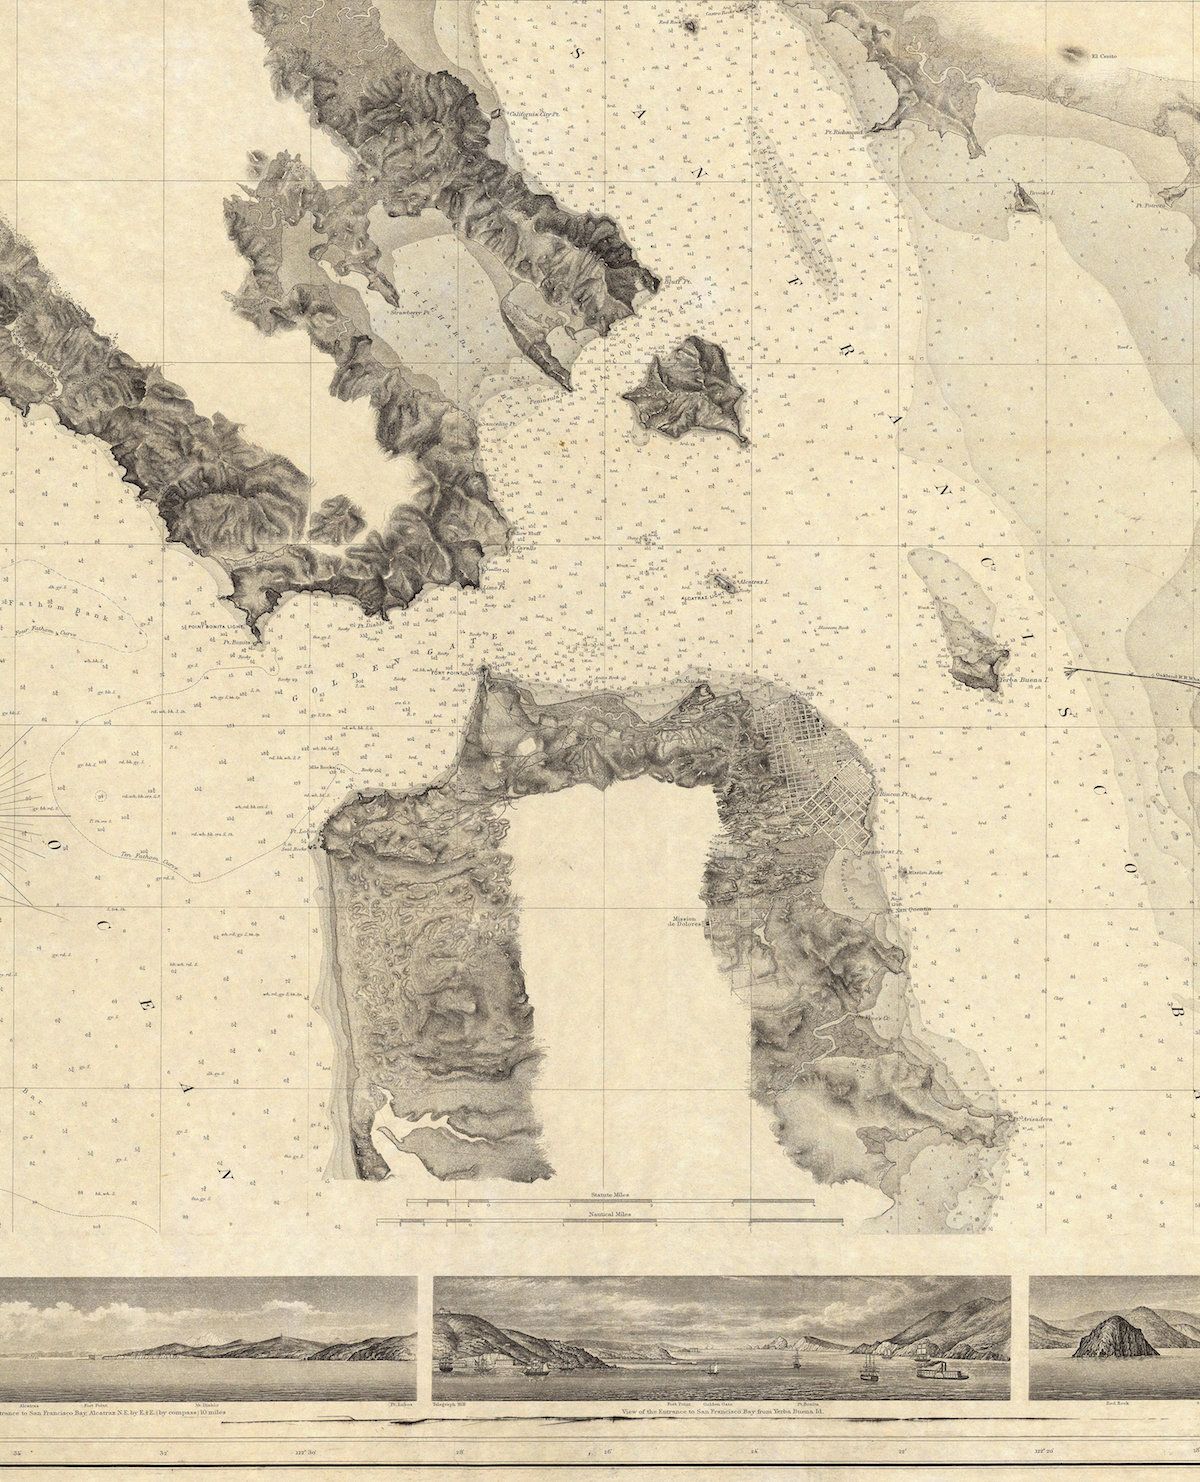 37.7166° N, 122.2830° W, Alexander Dallas Bache, "Entrance to San Francisco Bay California," 1859. This map uses the cartographic devices of spot elevations and soundings, respectively marking the altitude and depths of specific points at land and at sea. 